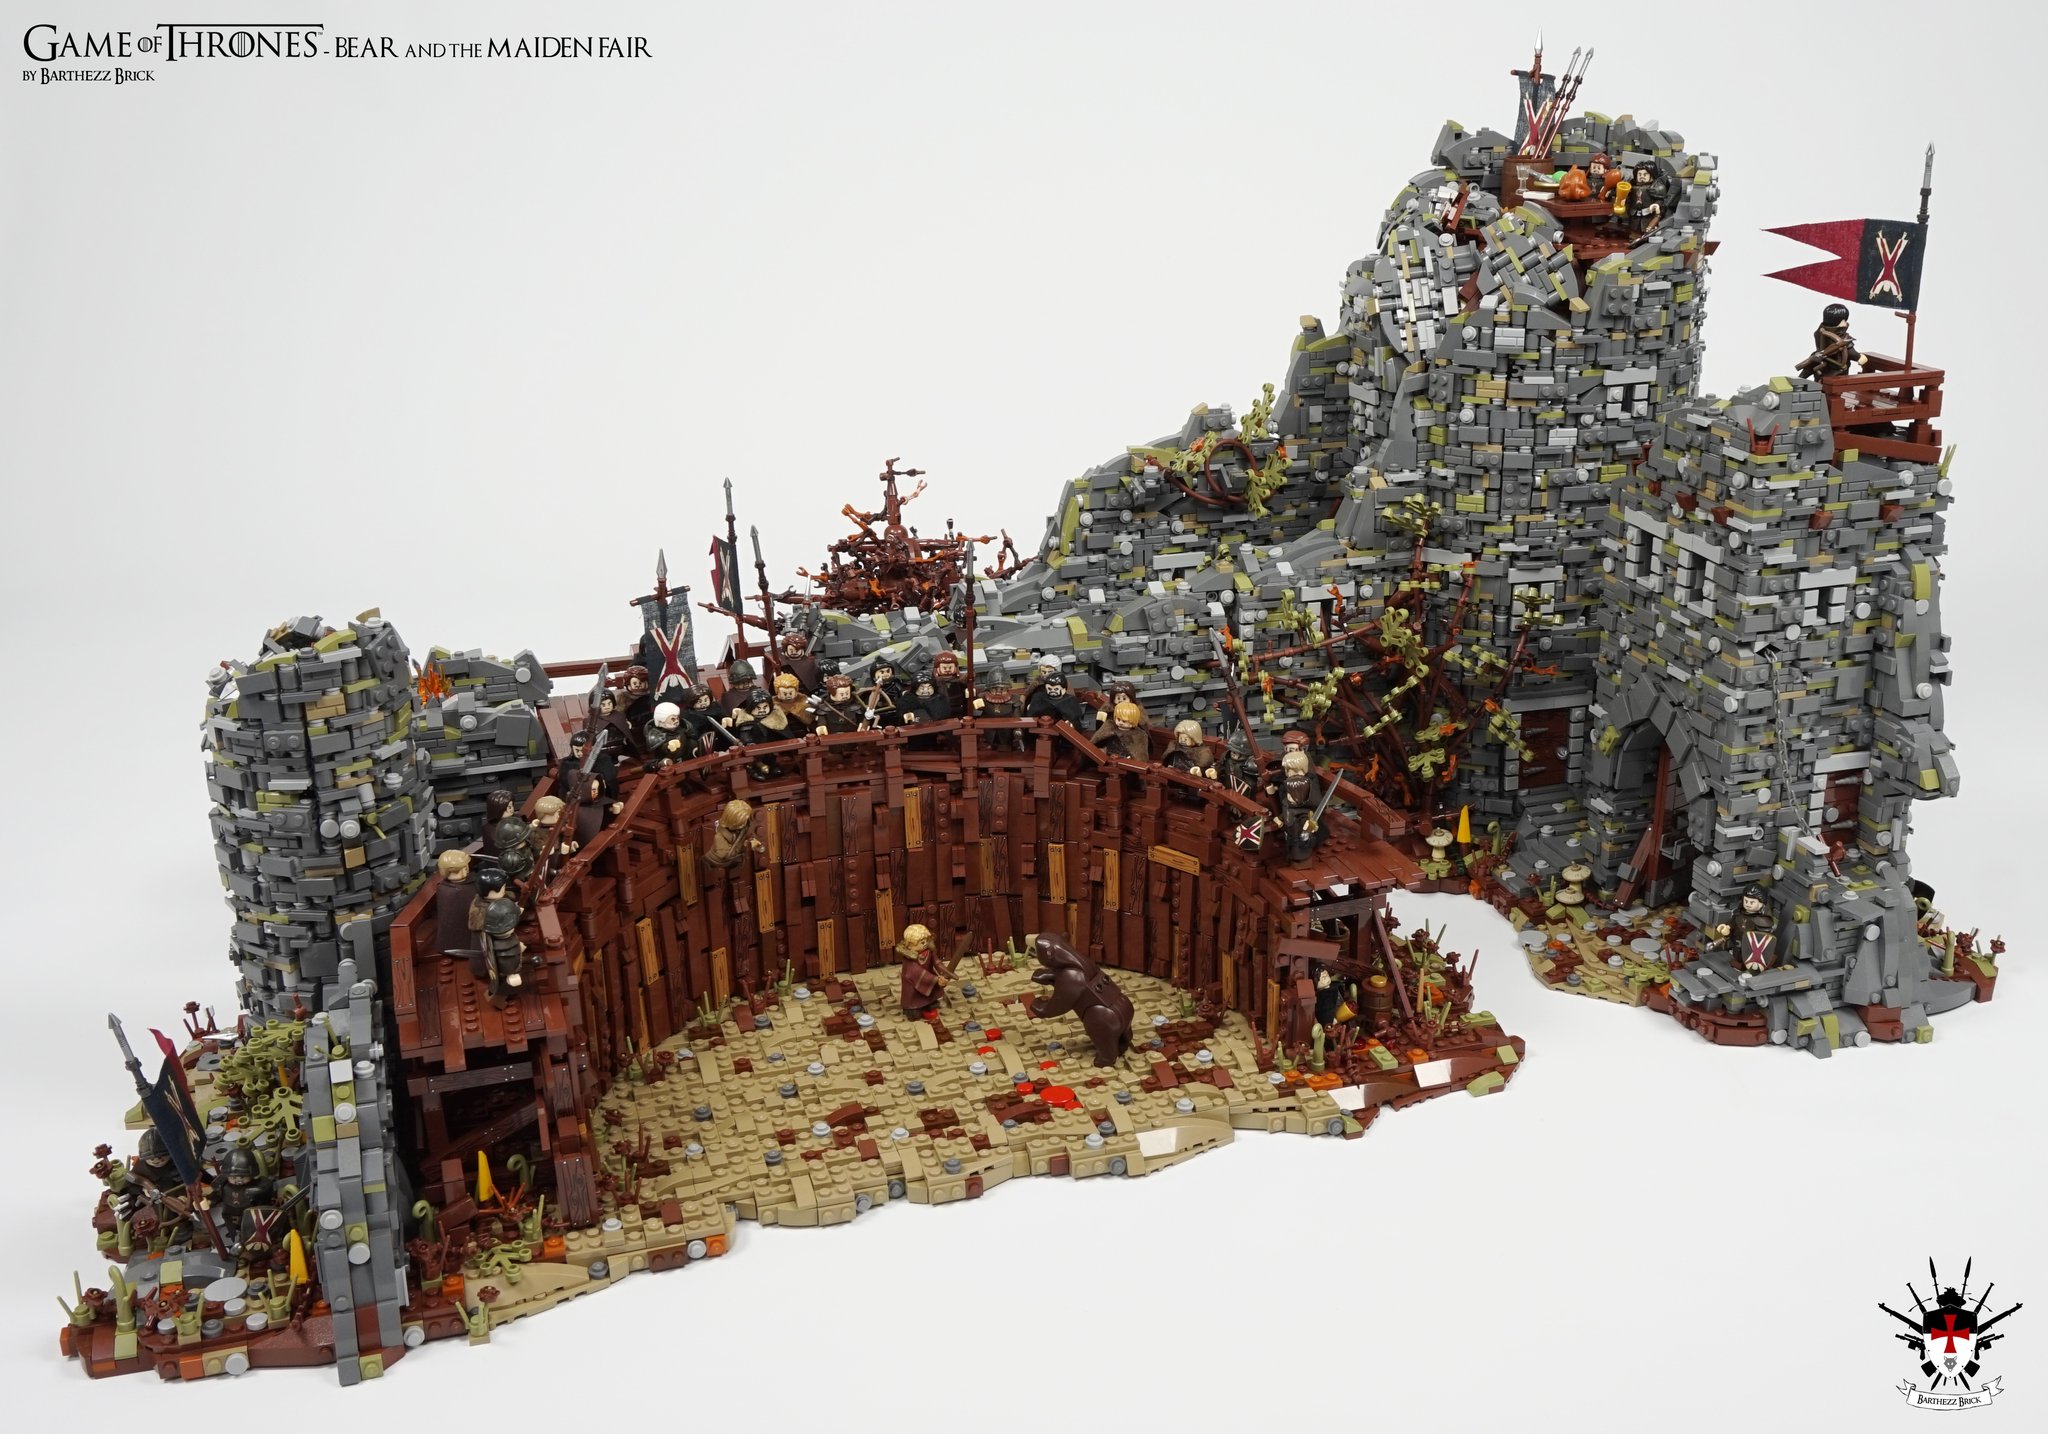 Brick on Twitter: "#Gameofthones - Bear and the Maiden Fair. After 5 months of and 20.000+ bricks later it was done. My biggest moc to date &gt; Including 21 custom